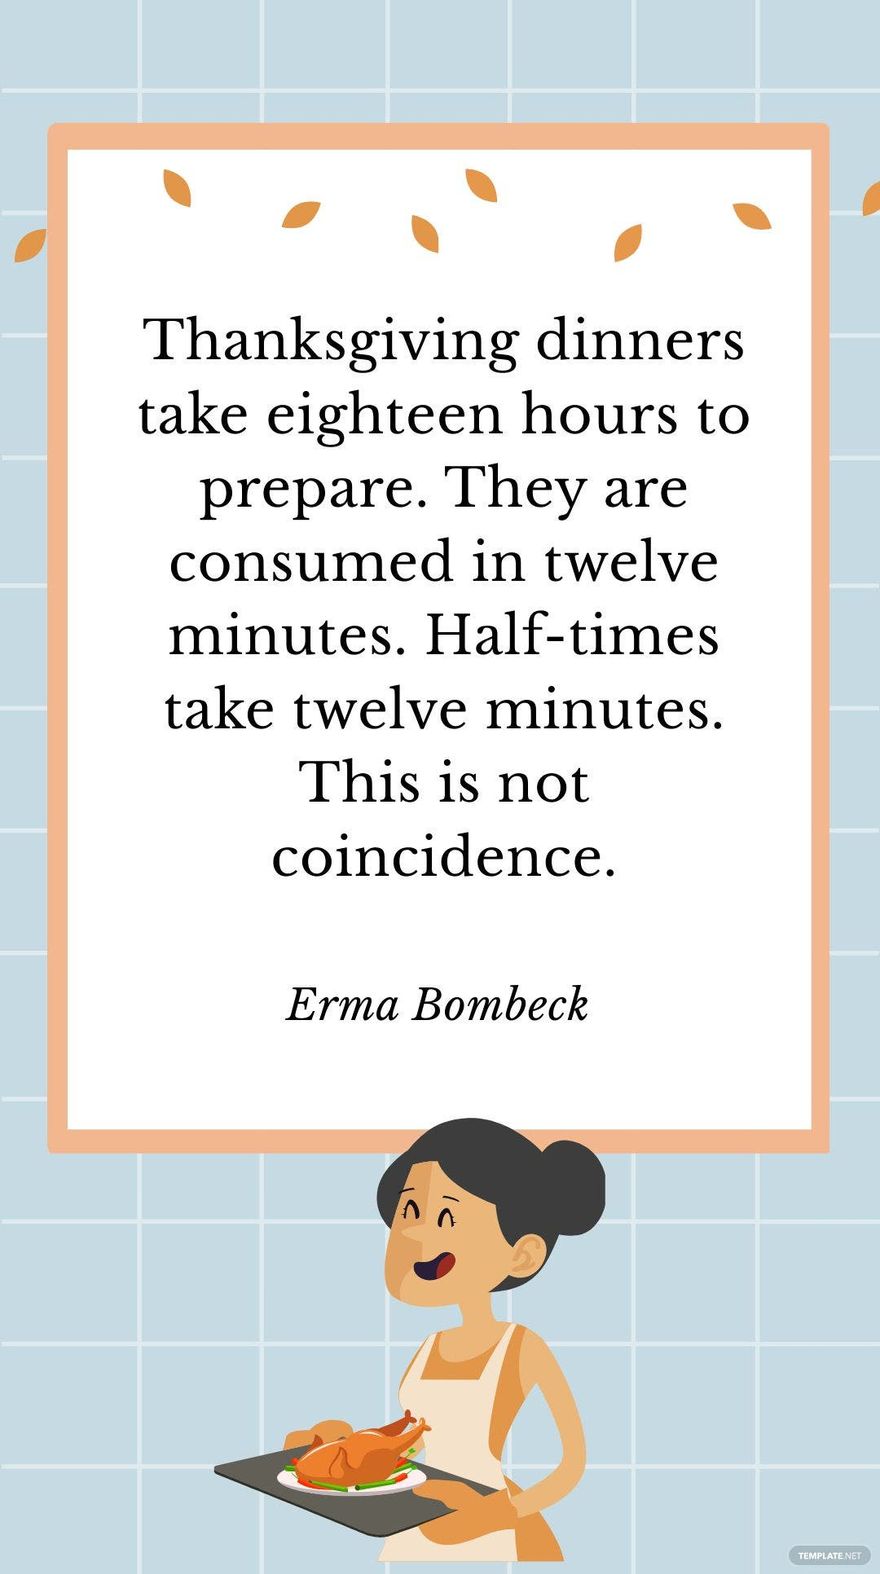 Erma Bombeck - Thanksgiving dinners take eighteen hours to prepare. They are consumed in twelve minutes. Half-times take twelve minutes. This is not coincidence. in JPG